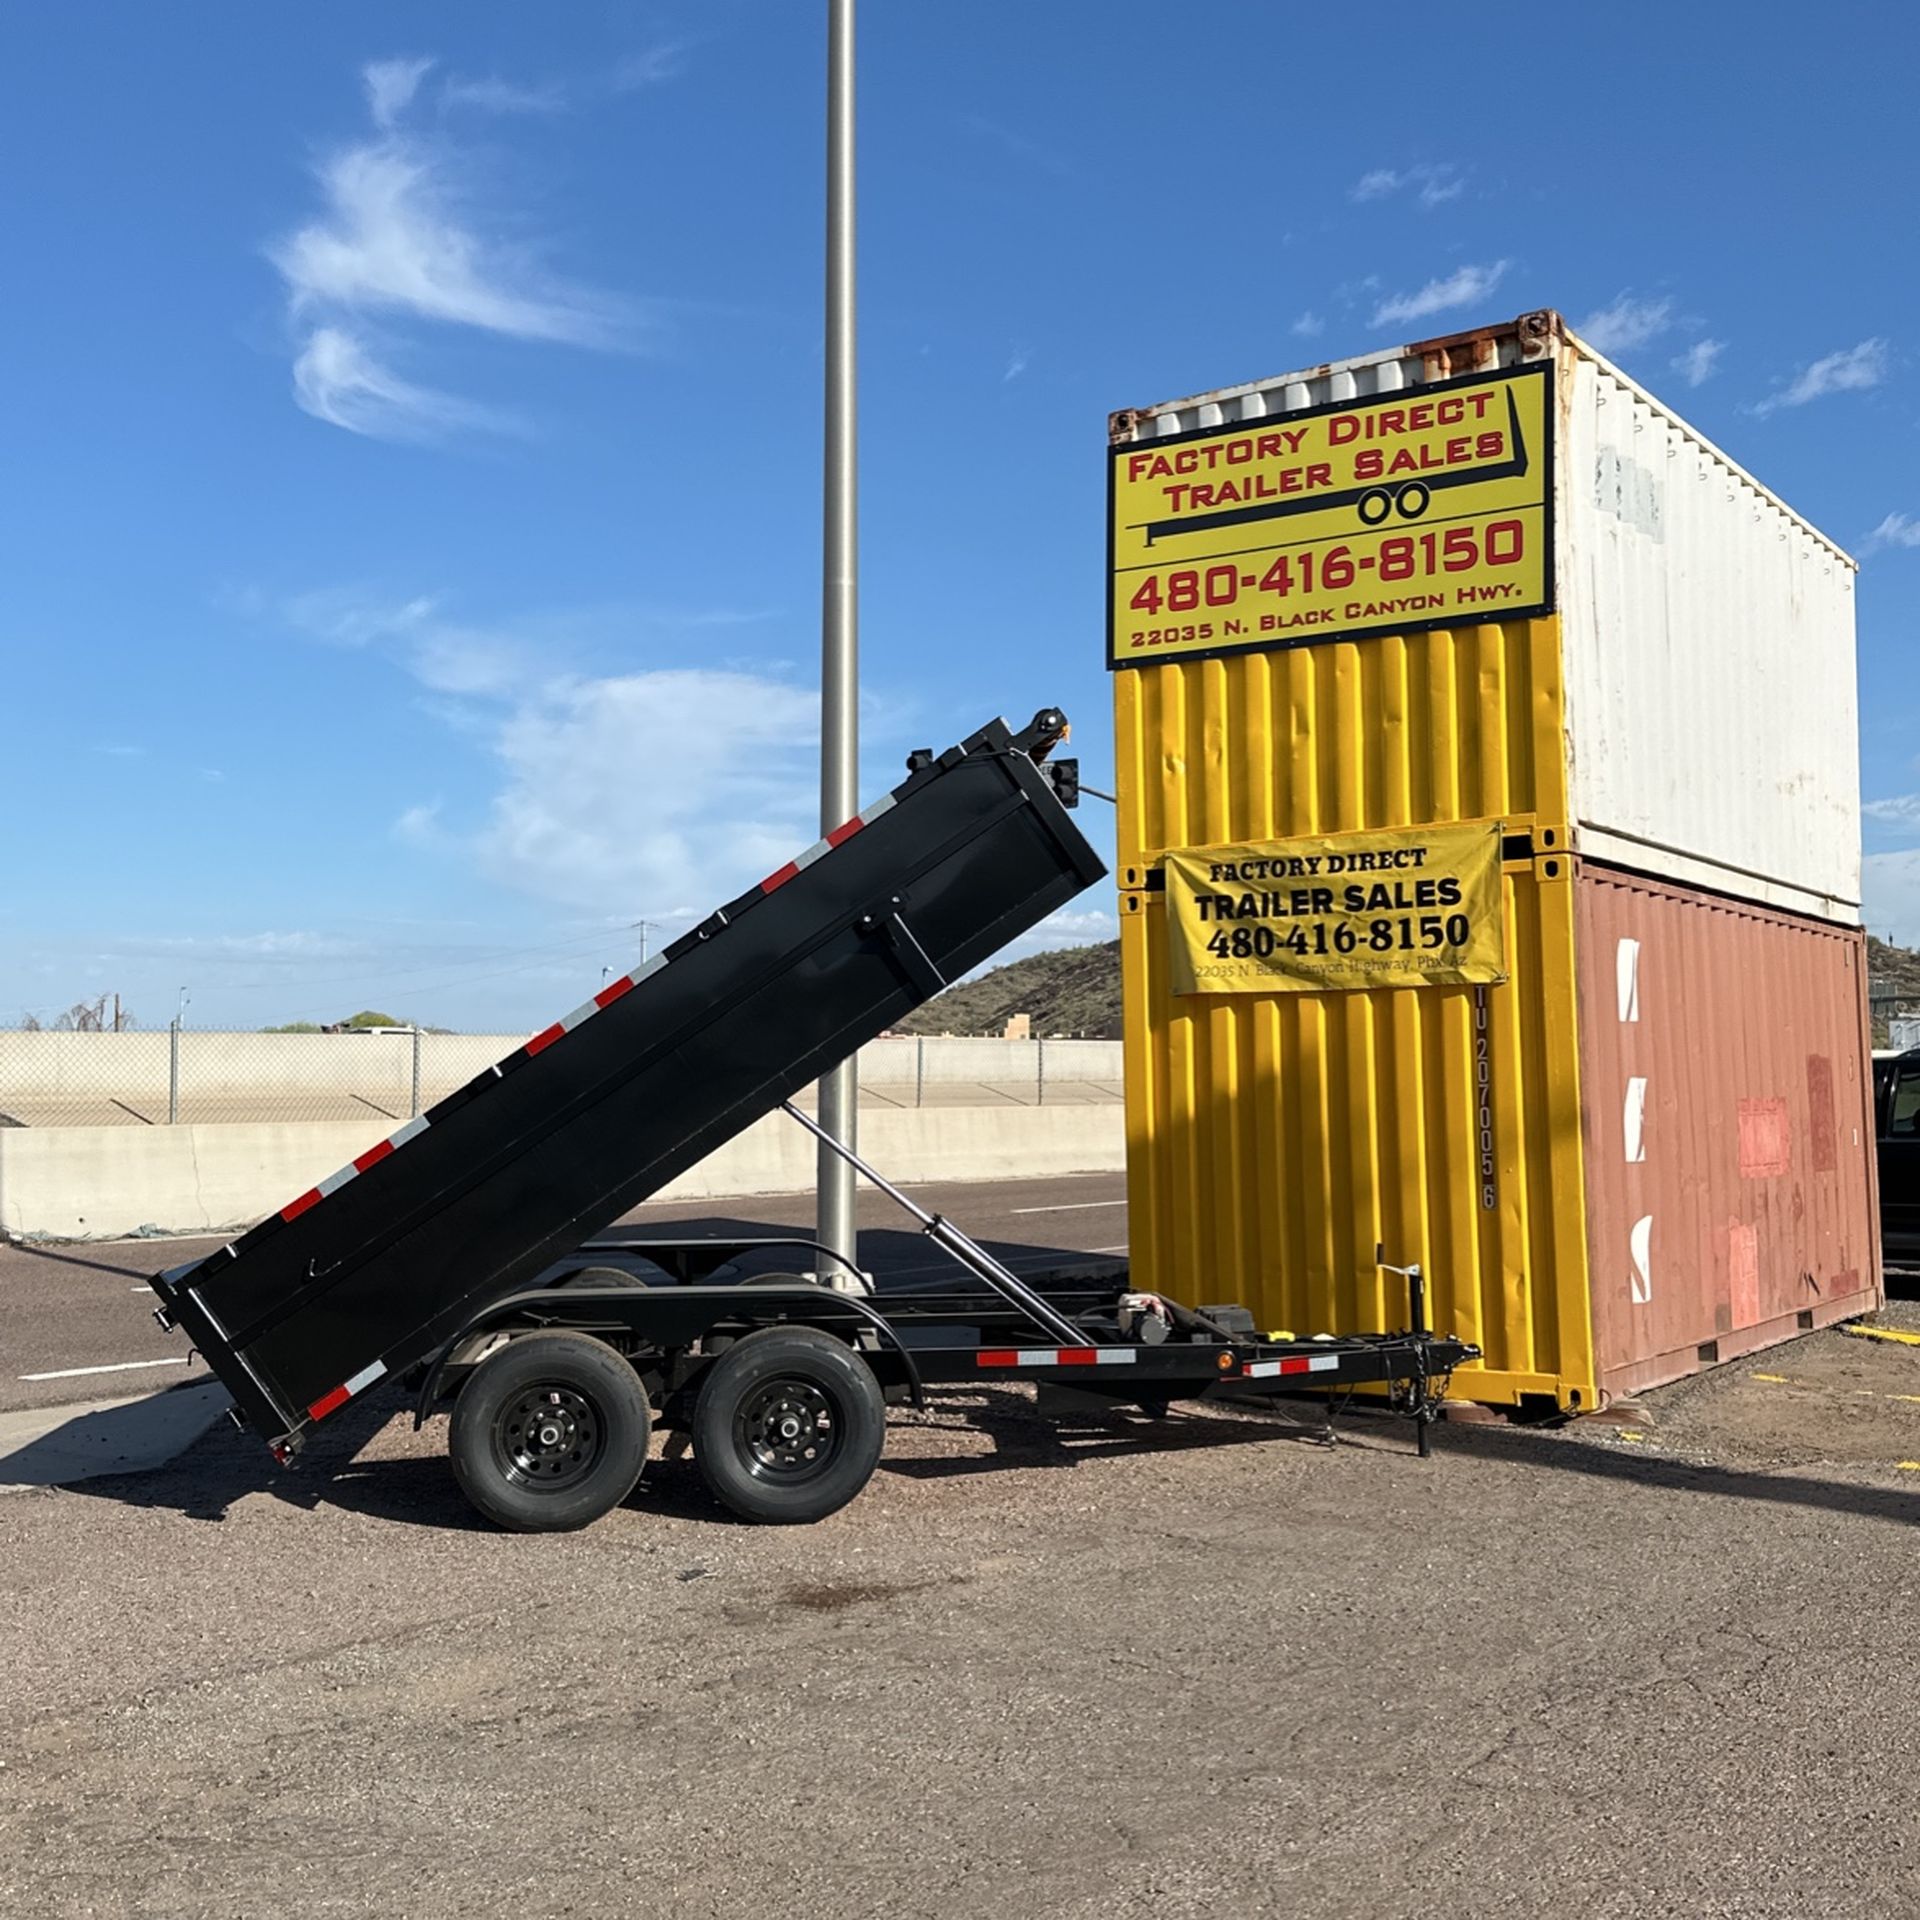 Brand New Dump Trailers Starting At $5400